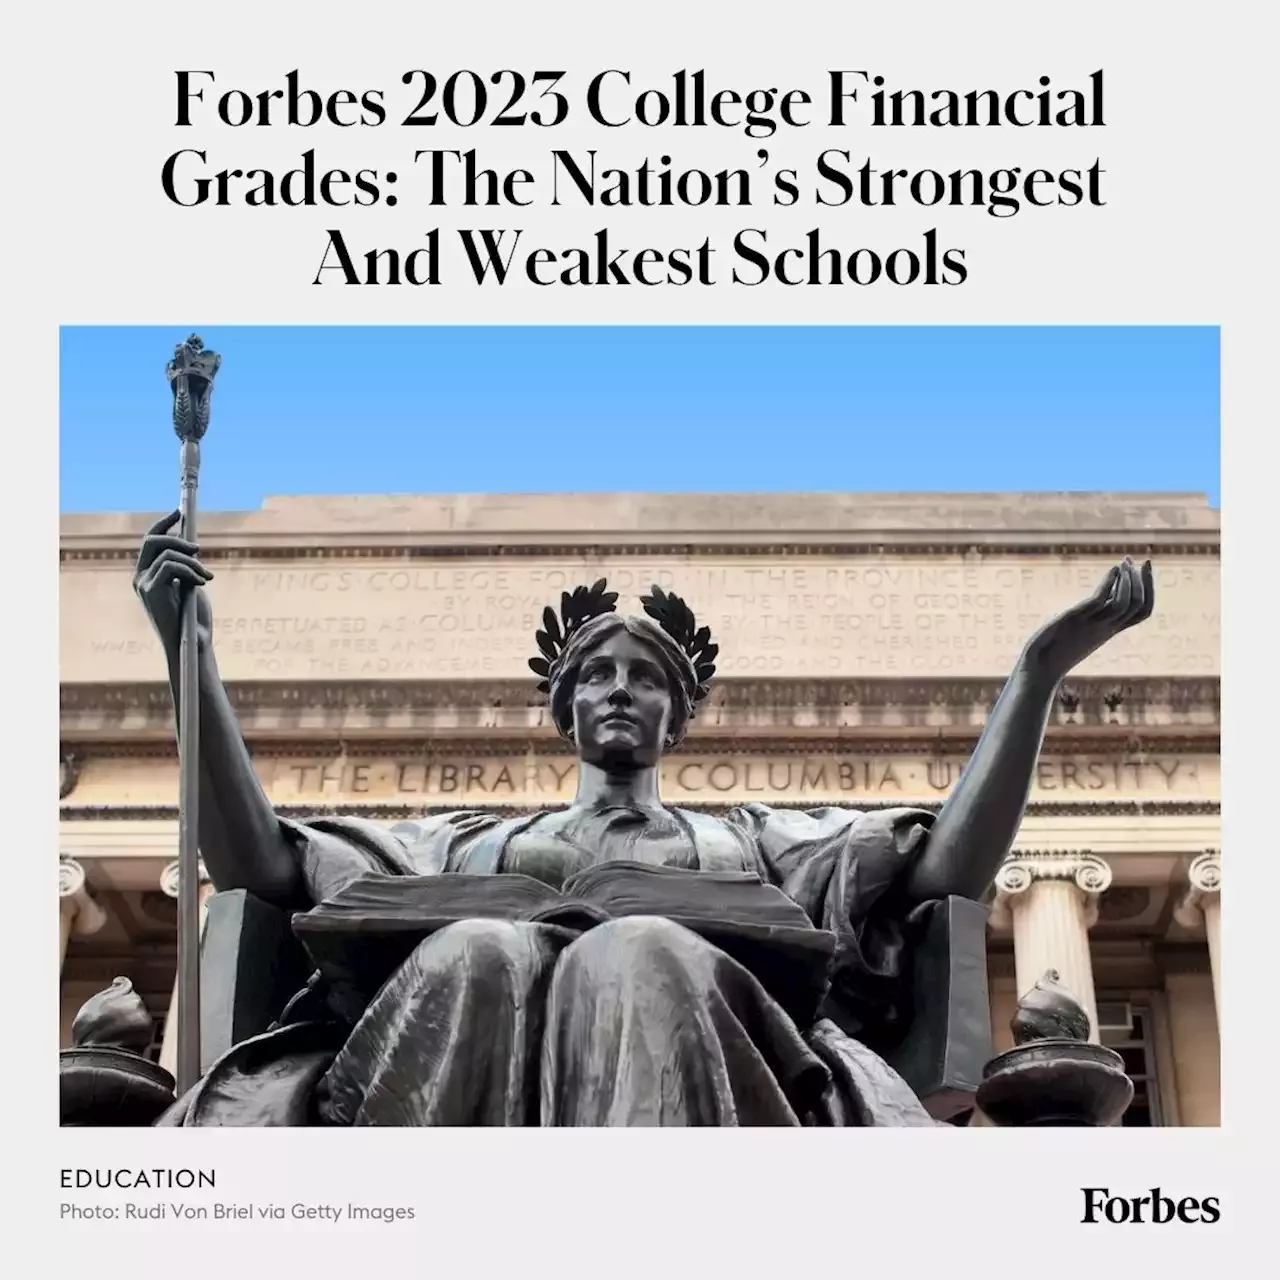 Forbes 2023 College Financial Grades The Nation’s Strongest And